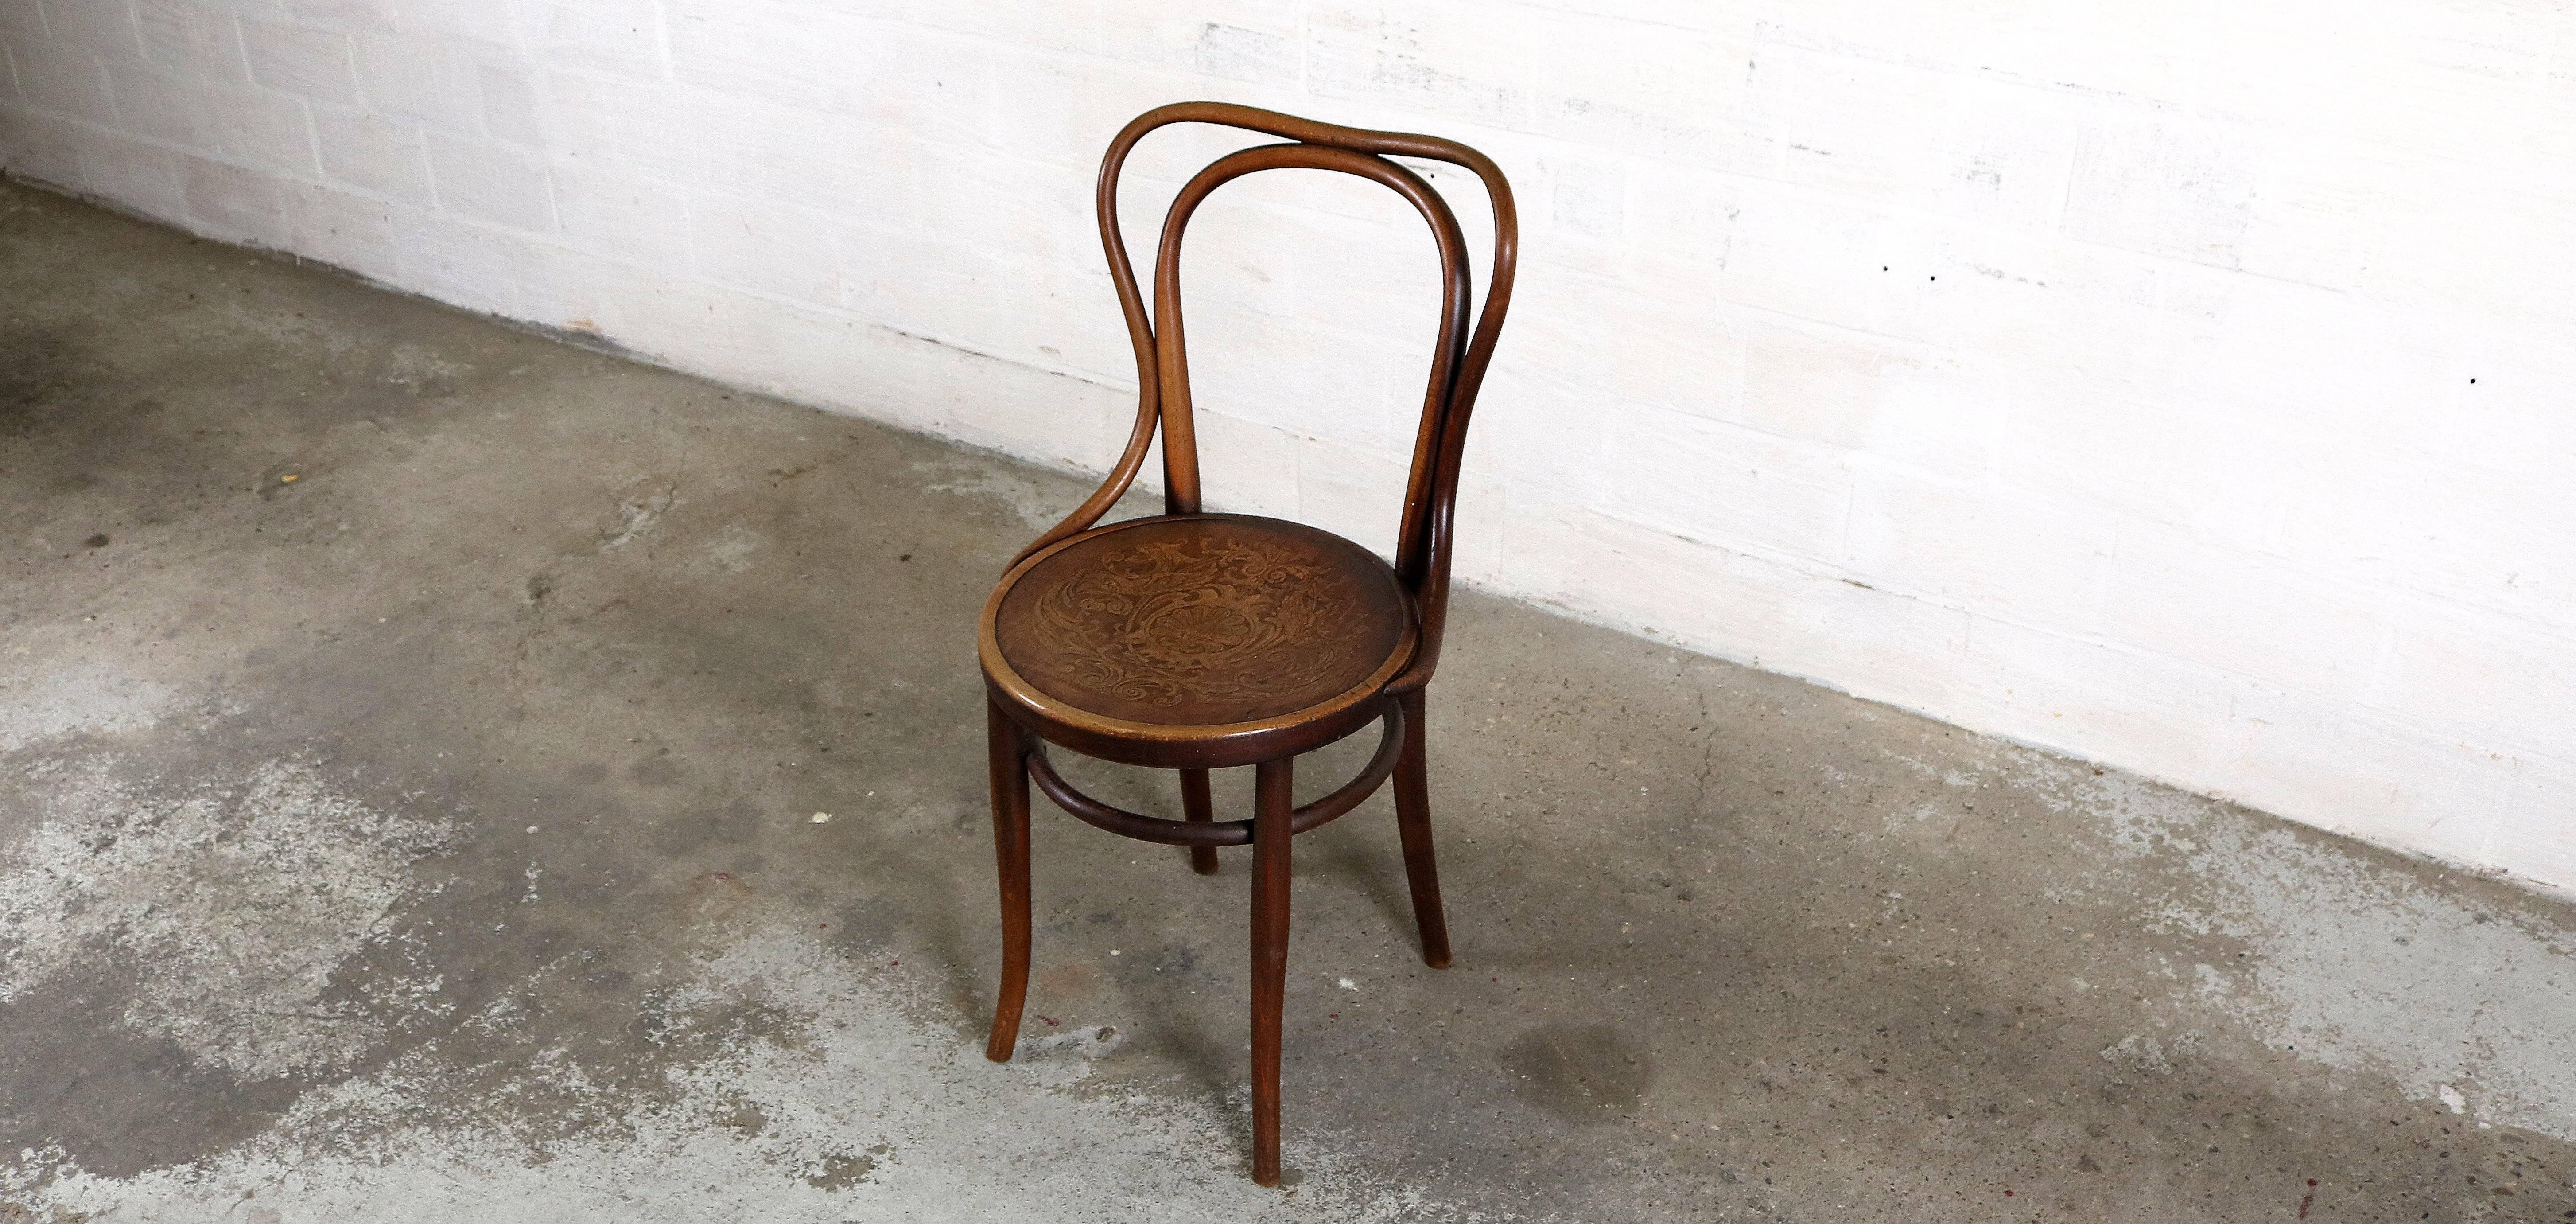 Antique chair by Jacob & Josef Kohn.
With beautiful motif on the seat.